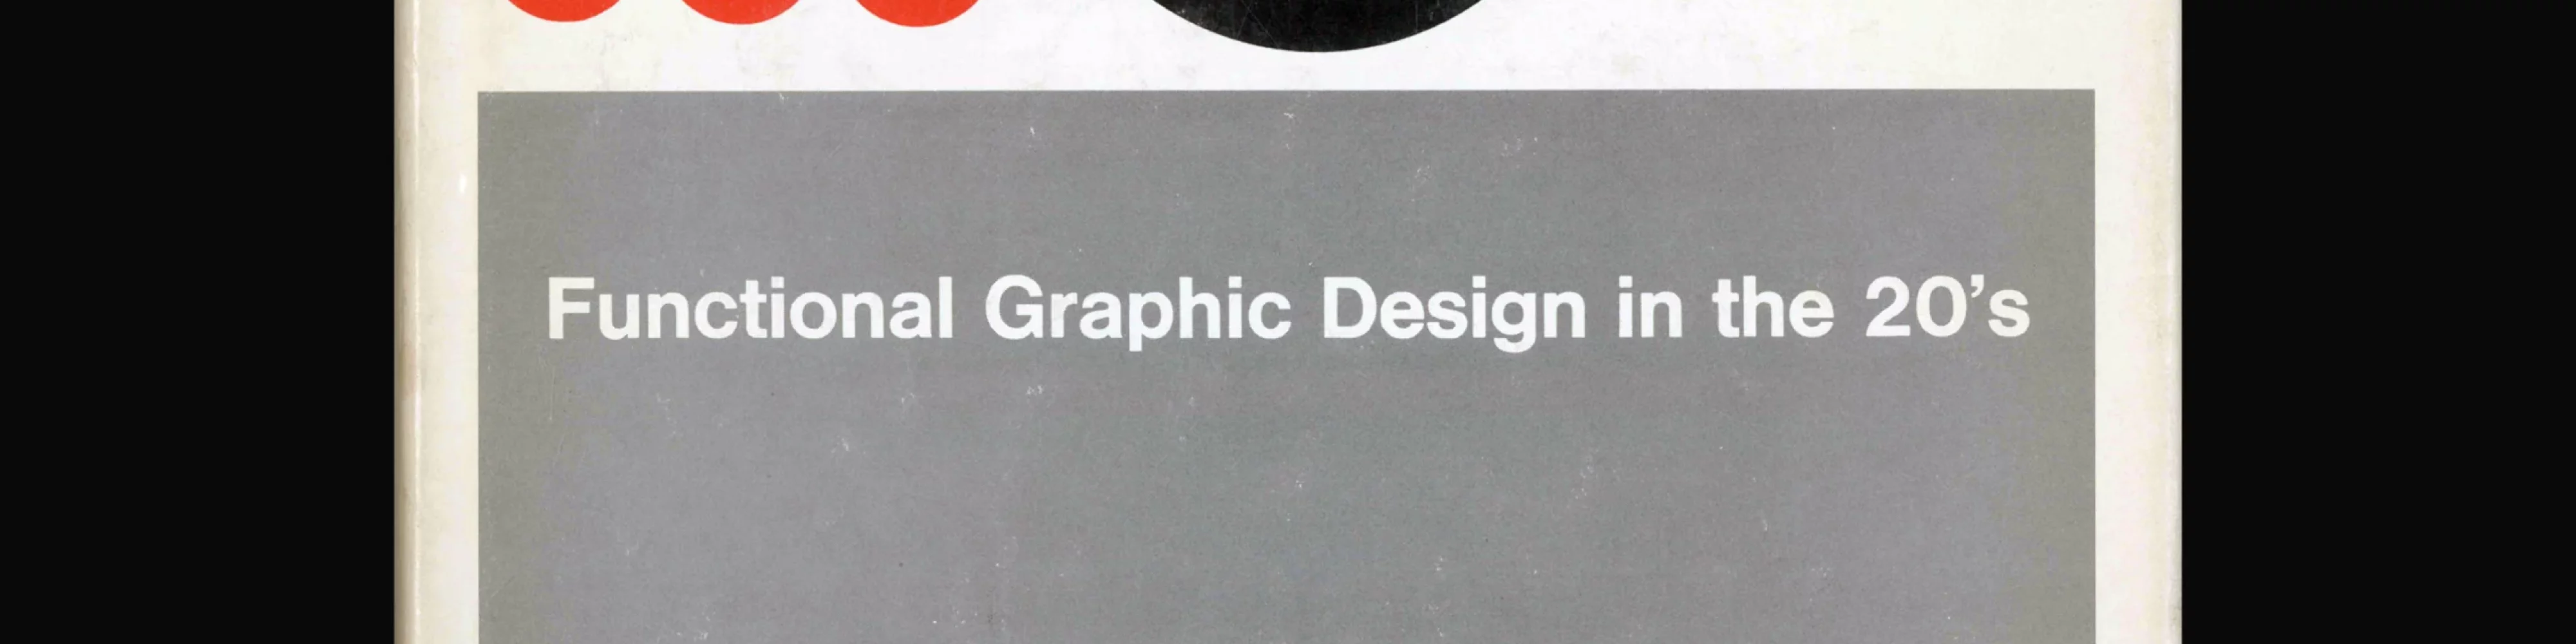 Functional Graphic Design in the 20's, Eckhard Neumann, 1967